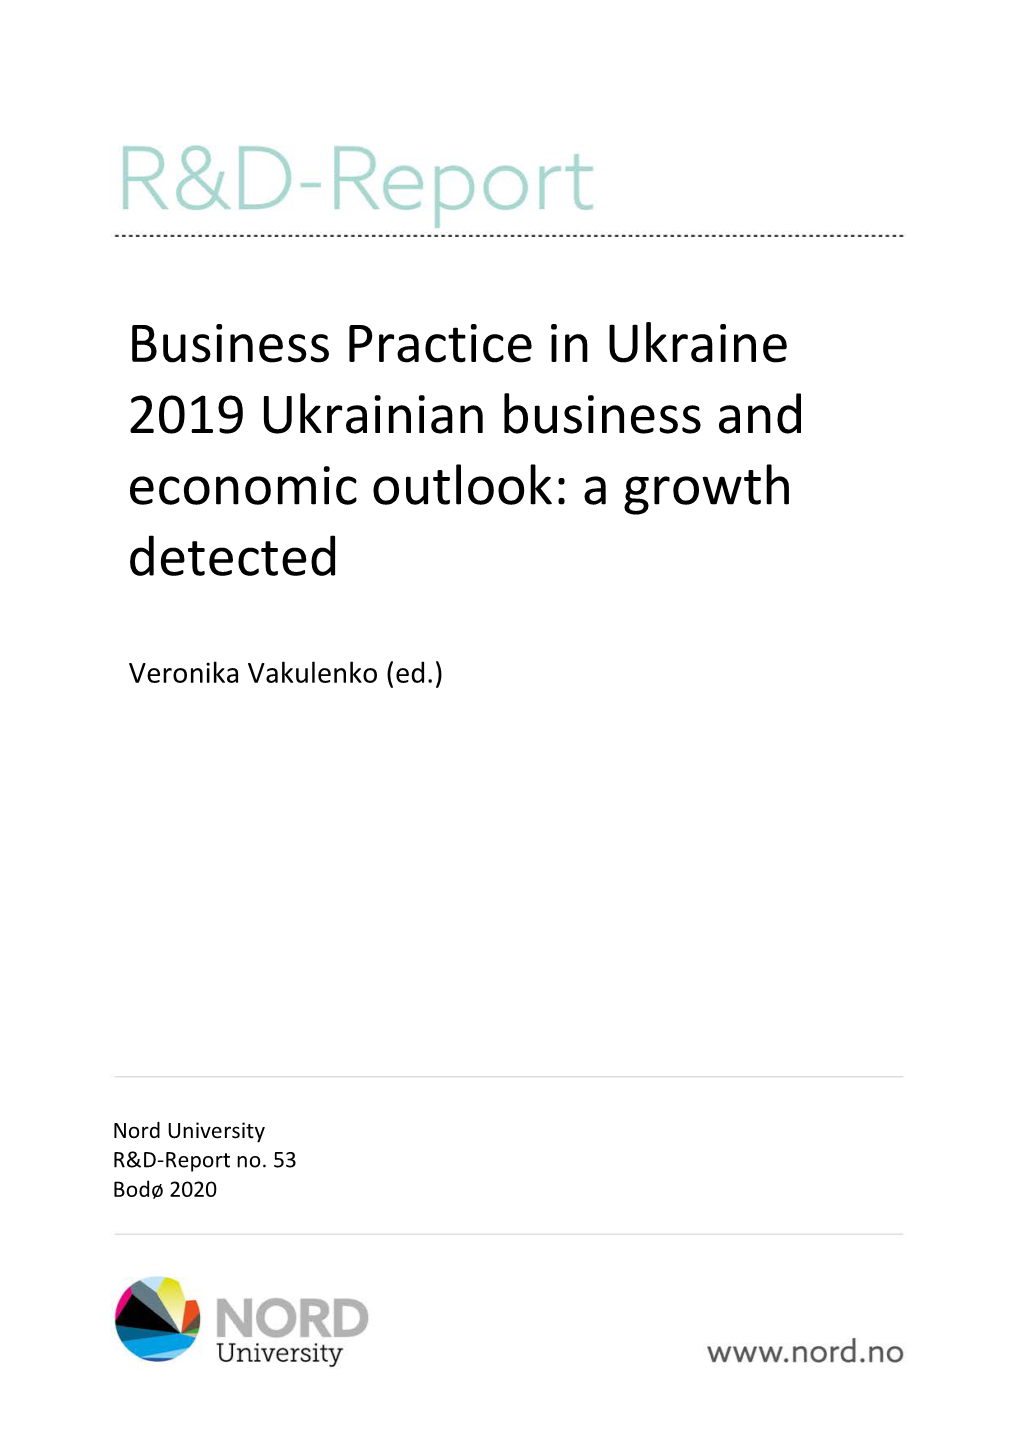 Business Practice in Ukraine 2019 Ukrainian Business and Economic Outlook: a Growth Detected